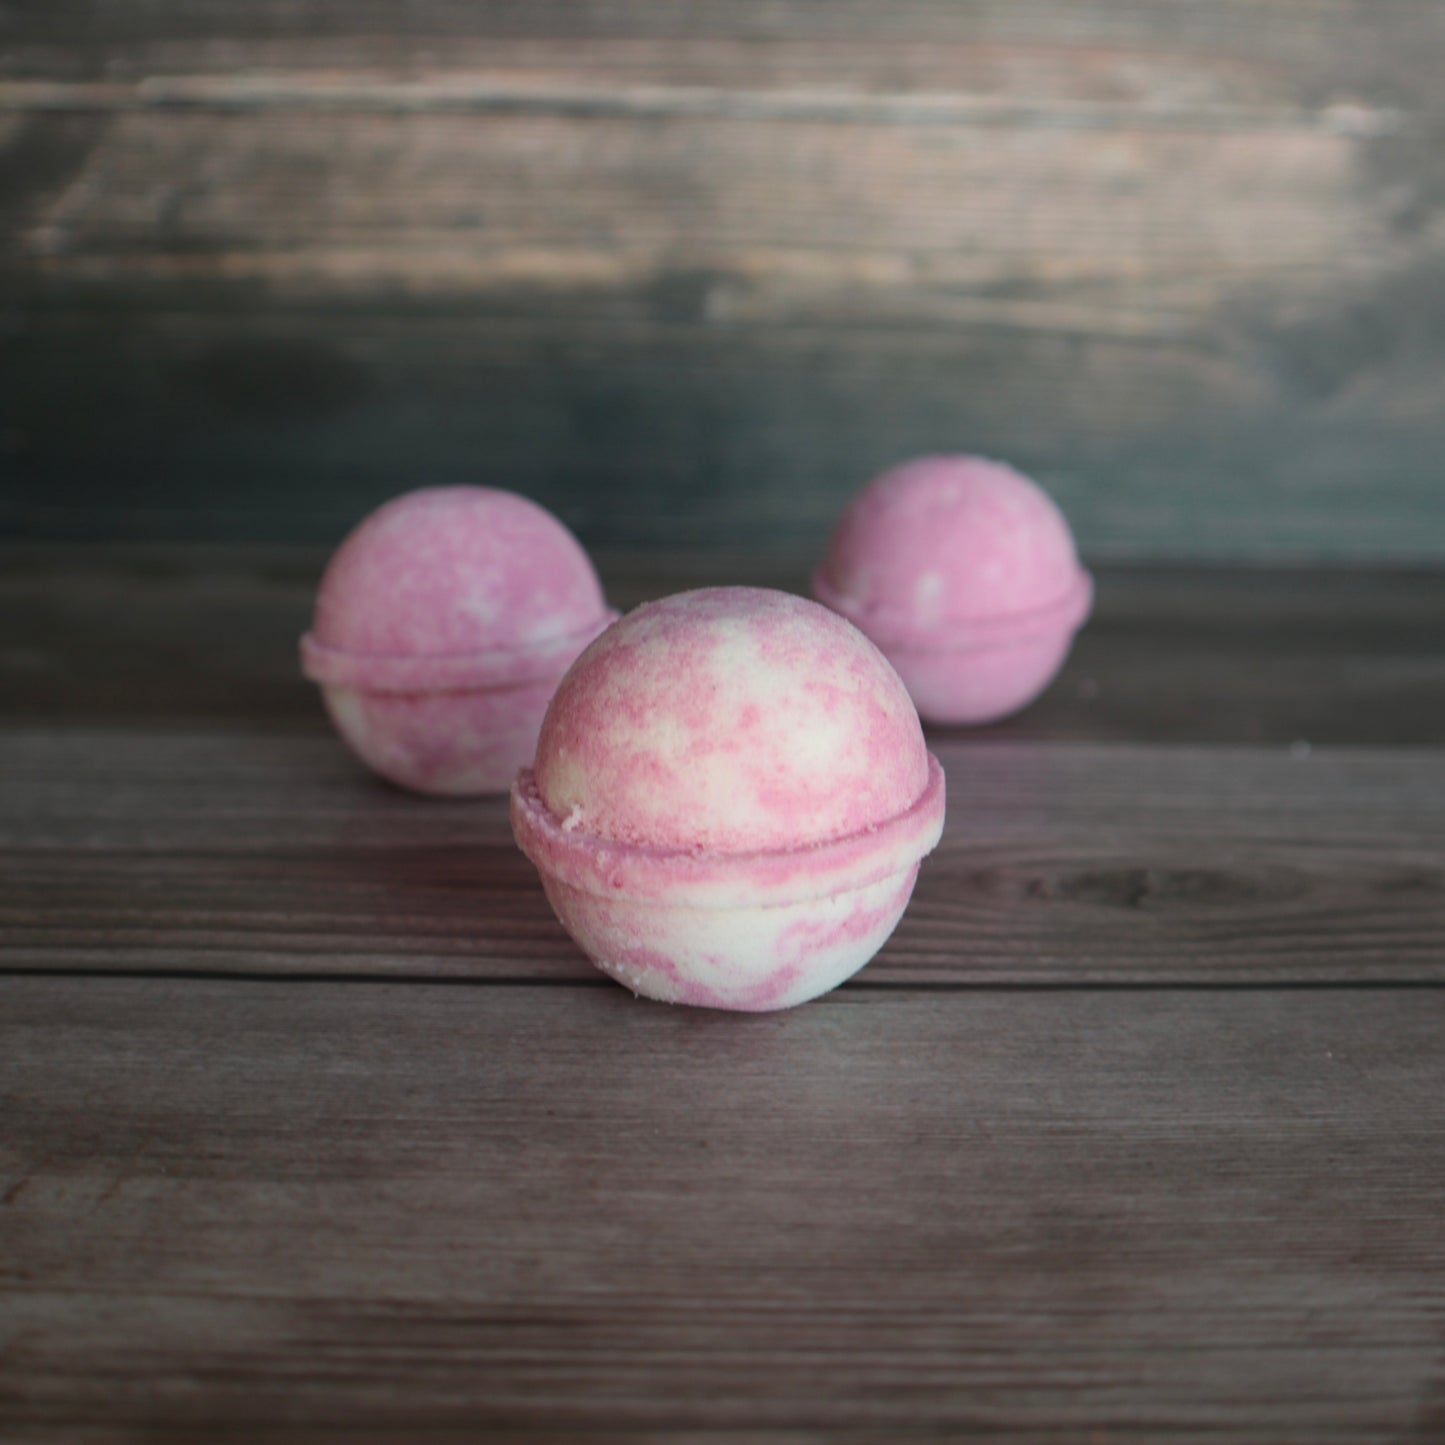 3 round pink and white marbled bath bombs.